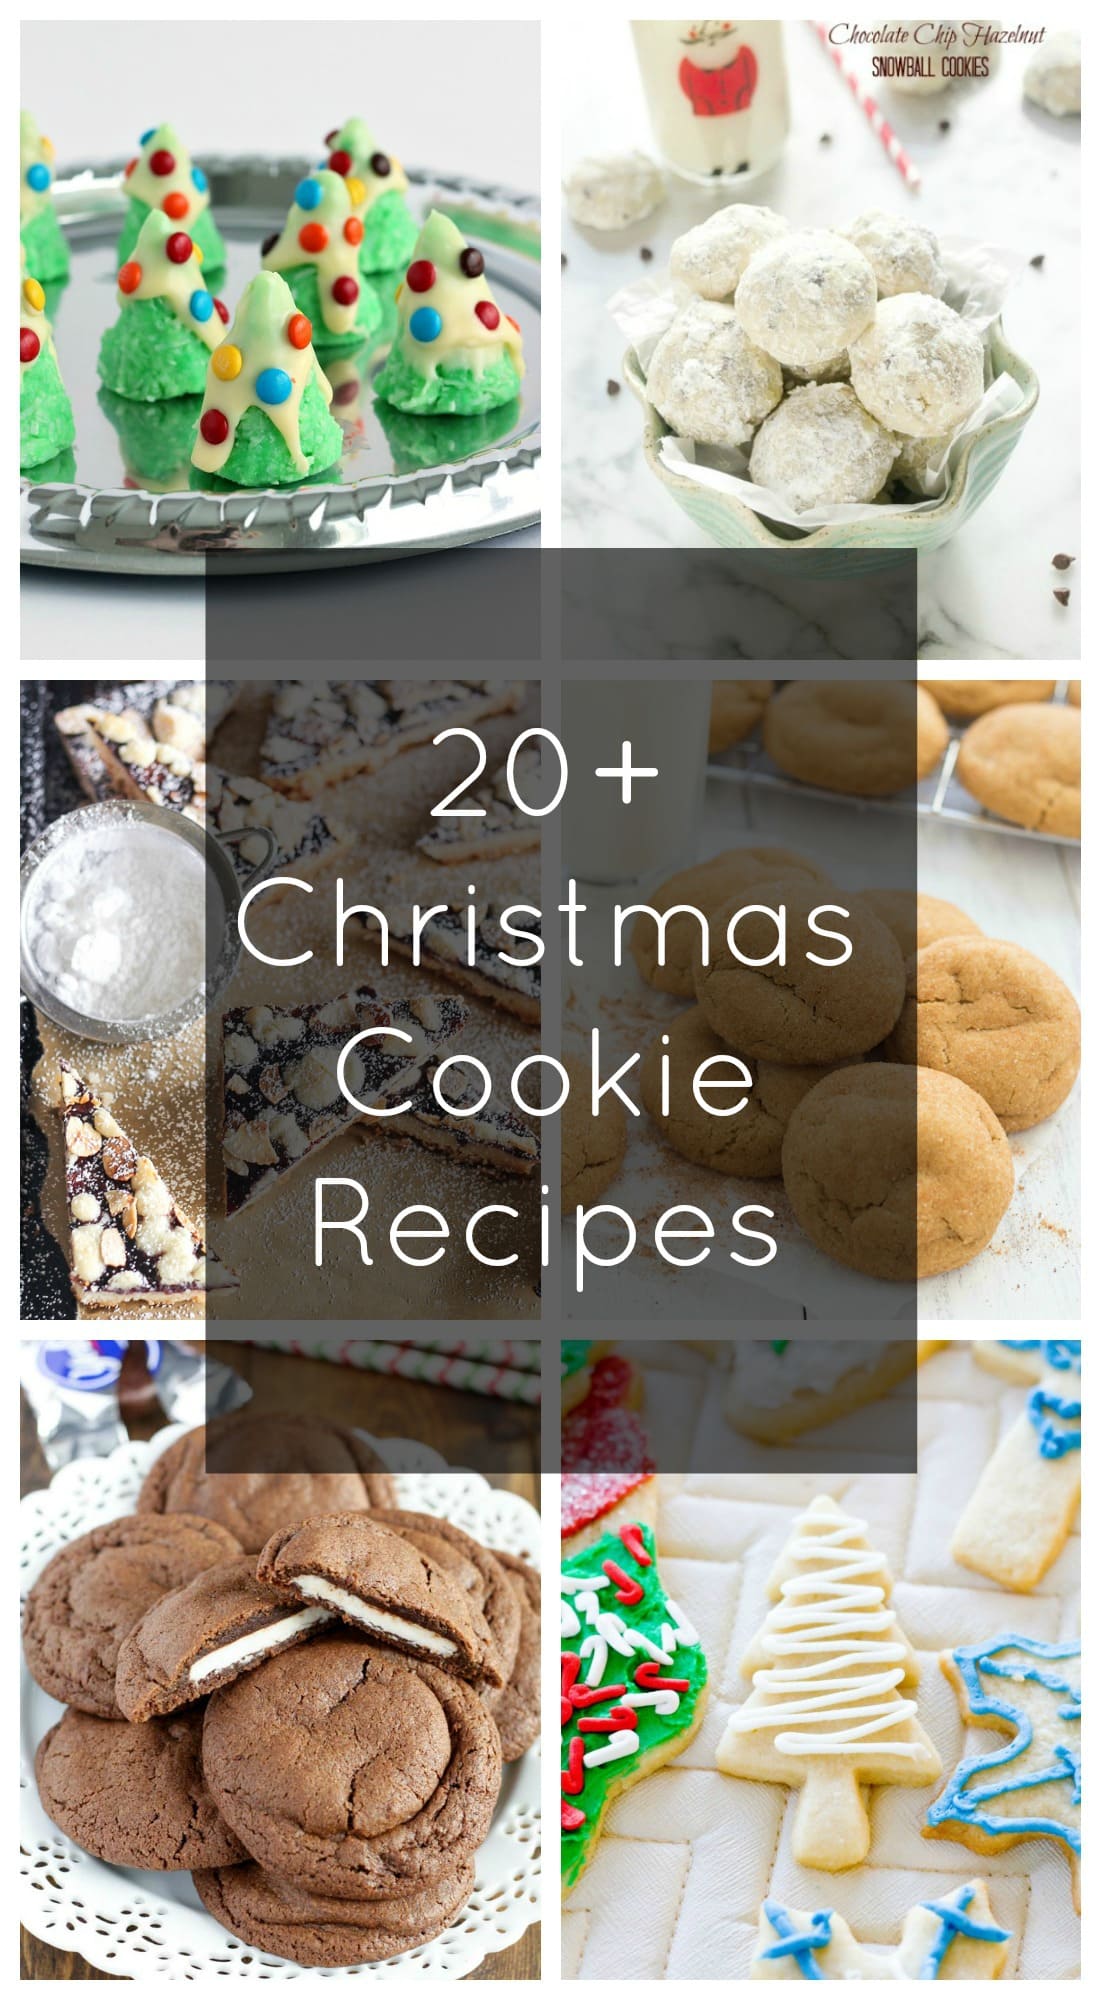 20+ Christmas Cookie Recipes - Live Well Bake Often